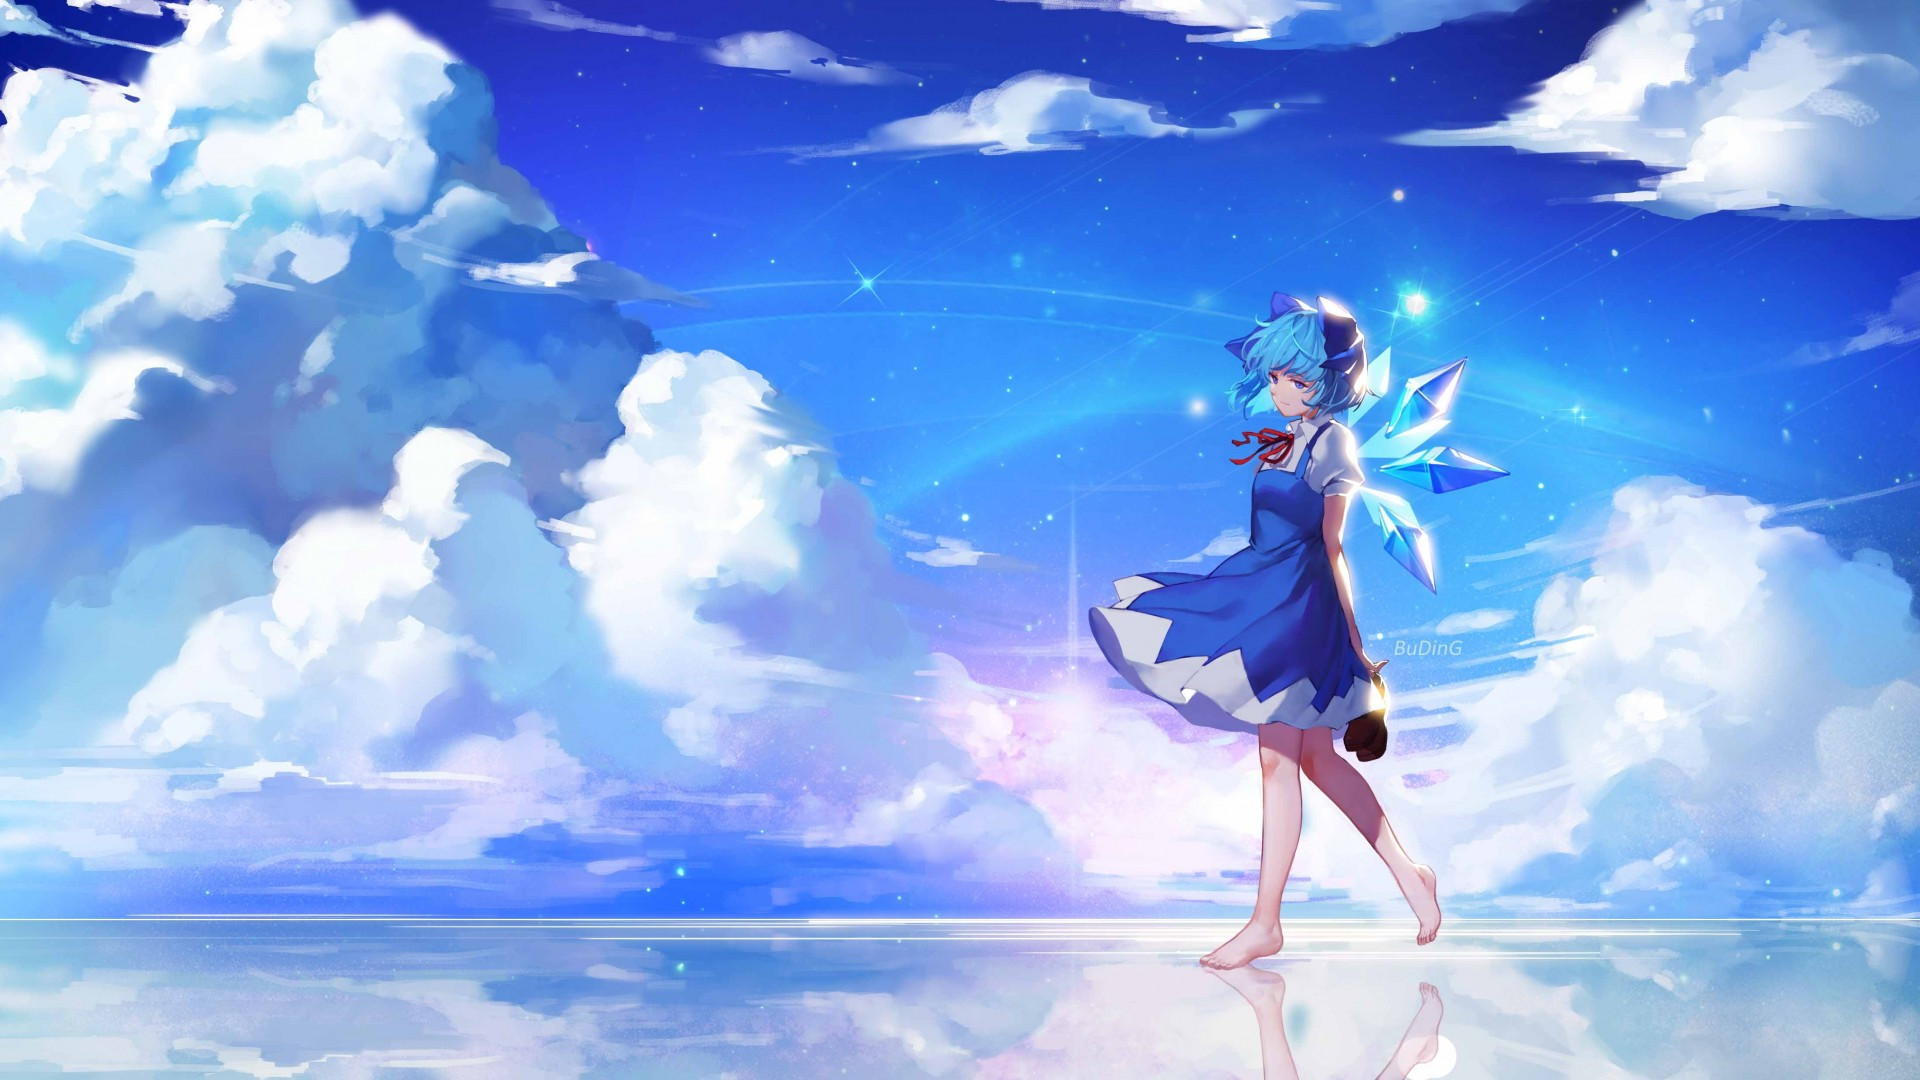 Download 1920x1080 Cirno, Touhou, Walking, Beyond The Clouds, Crystals, Aqua Hair Wallpaper for Widescreen